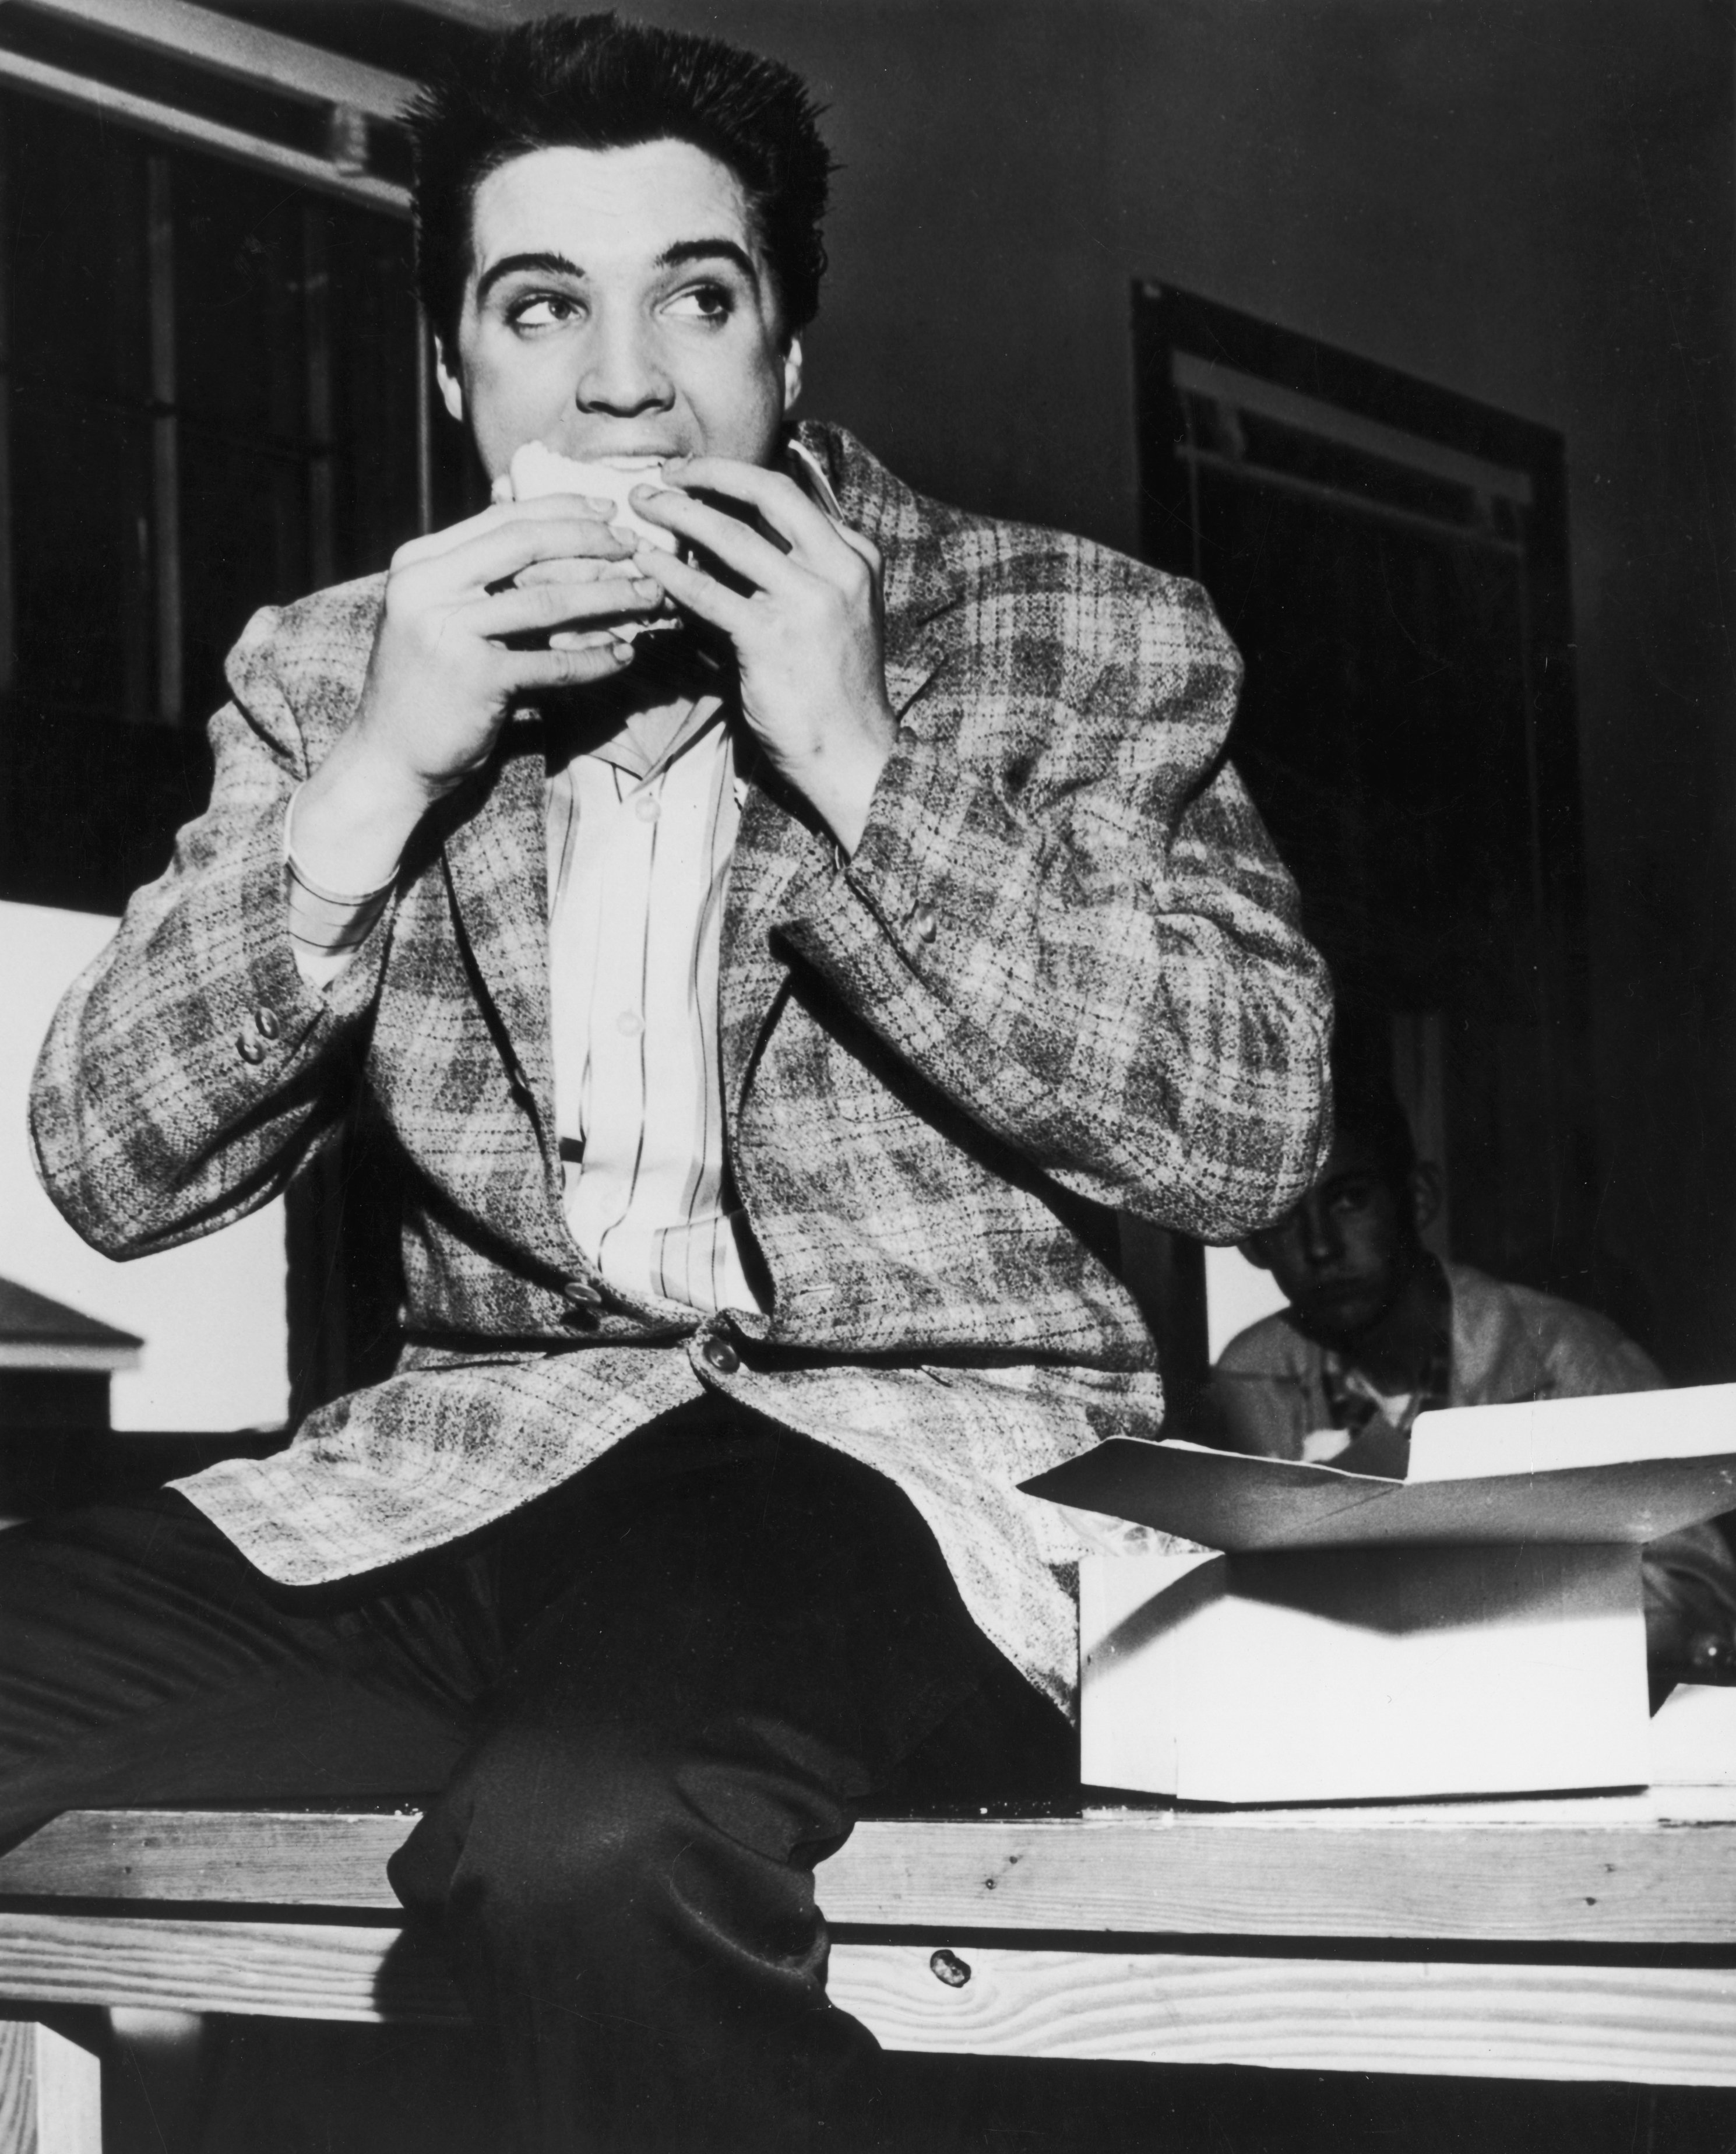 Actor Elvis Presley pictured sitting on a bench eating a sandwich on March 25, 1958 in Memphis, Tennessee ┃ Source: Getty Images